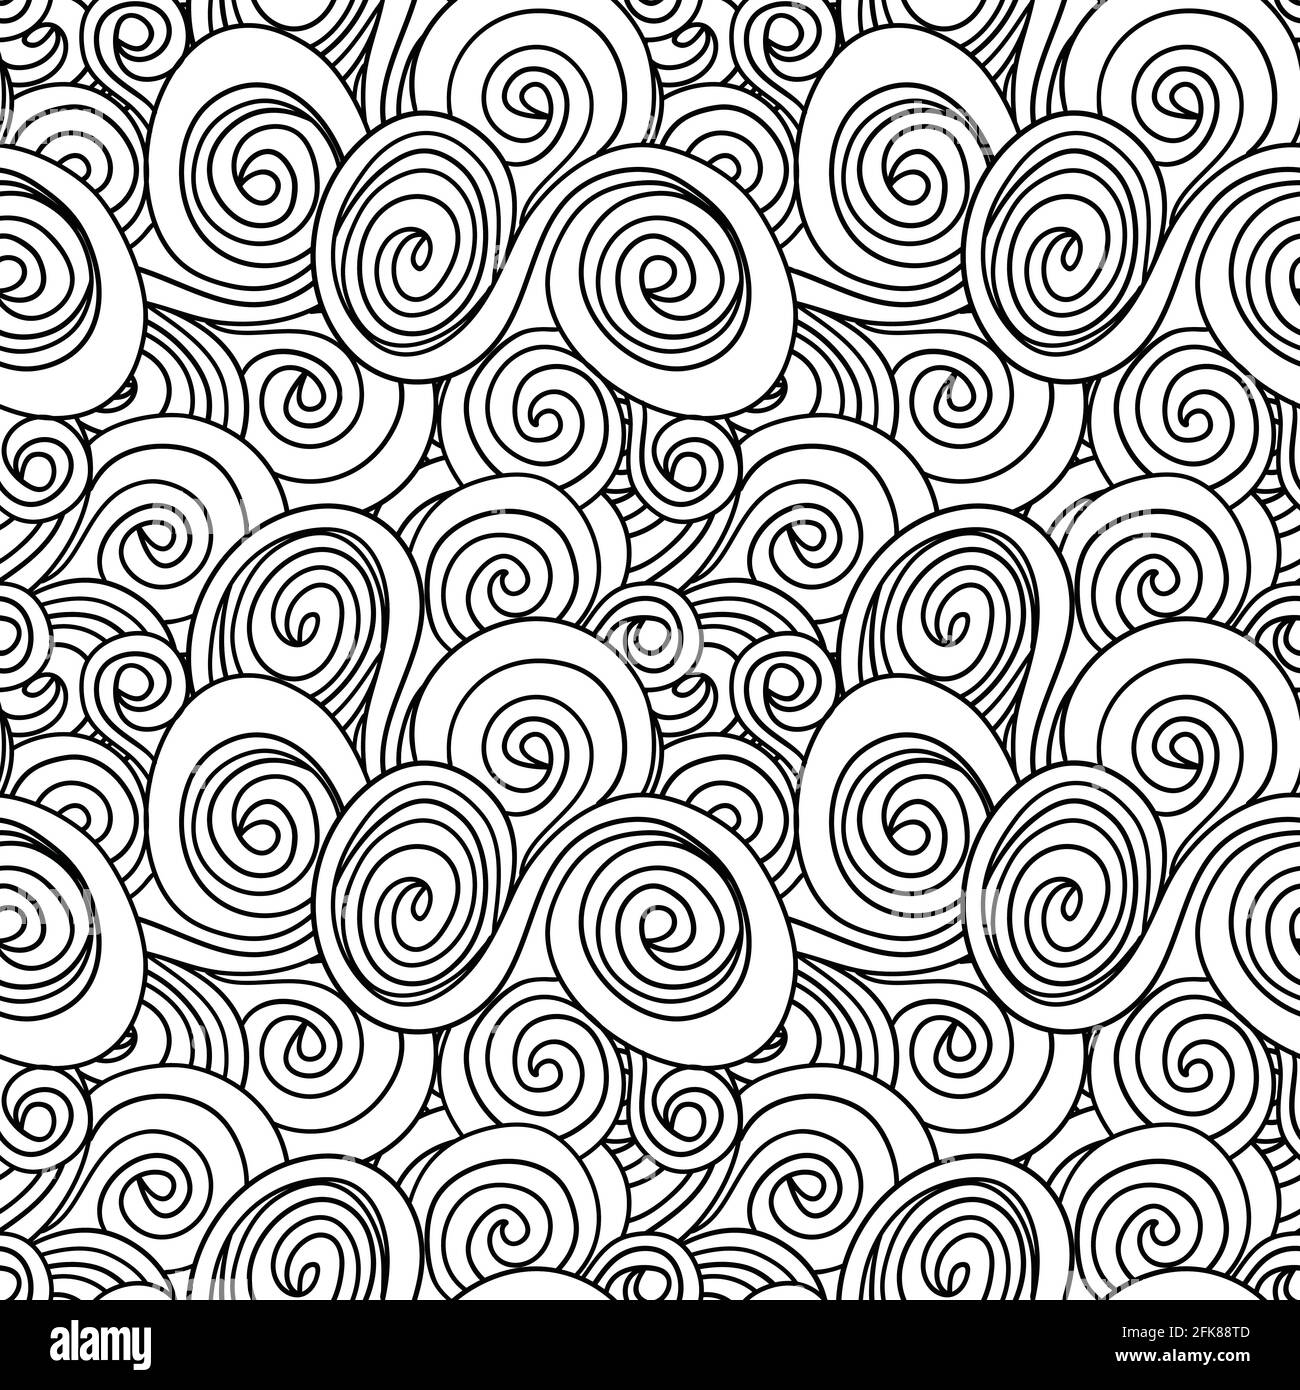 Seamless pattern with cute black doodle clouds on white. Childrens repeating background. Endless texture can be used for wallpaper, pattern fills, web Stock Vector